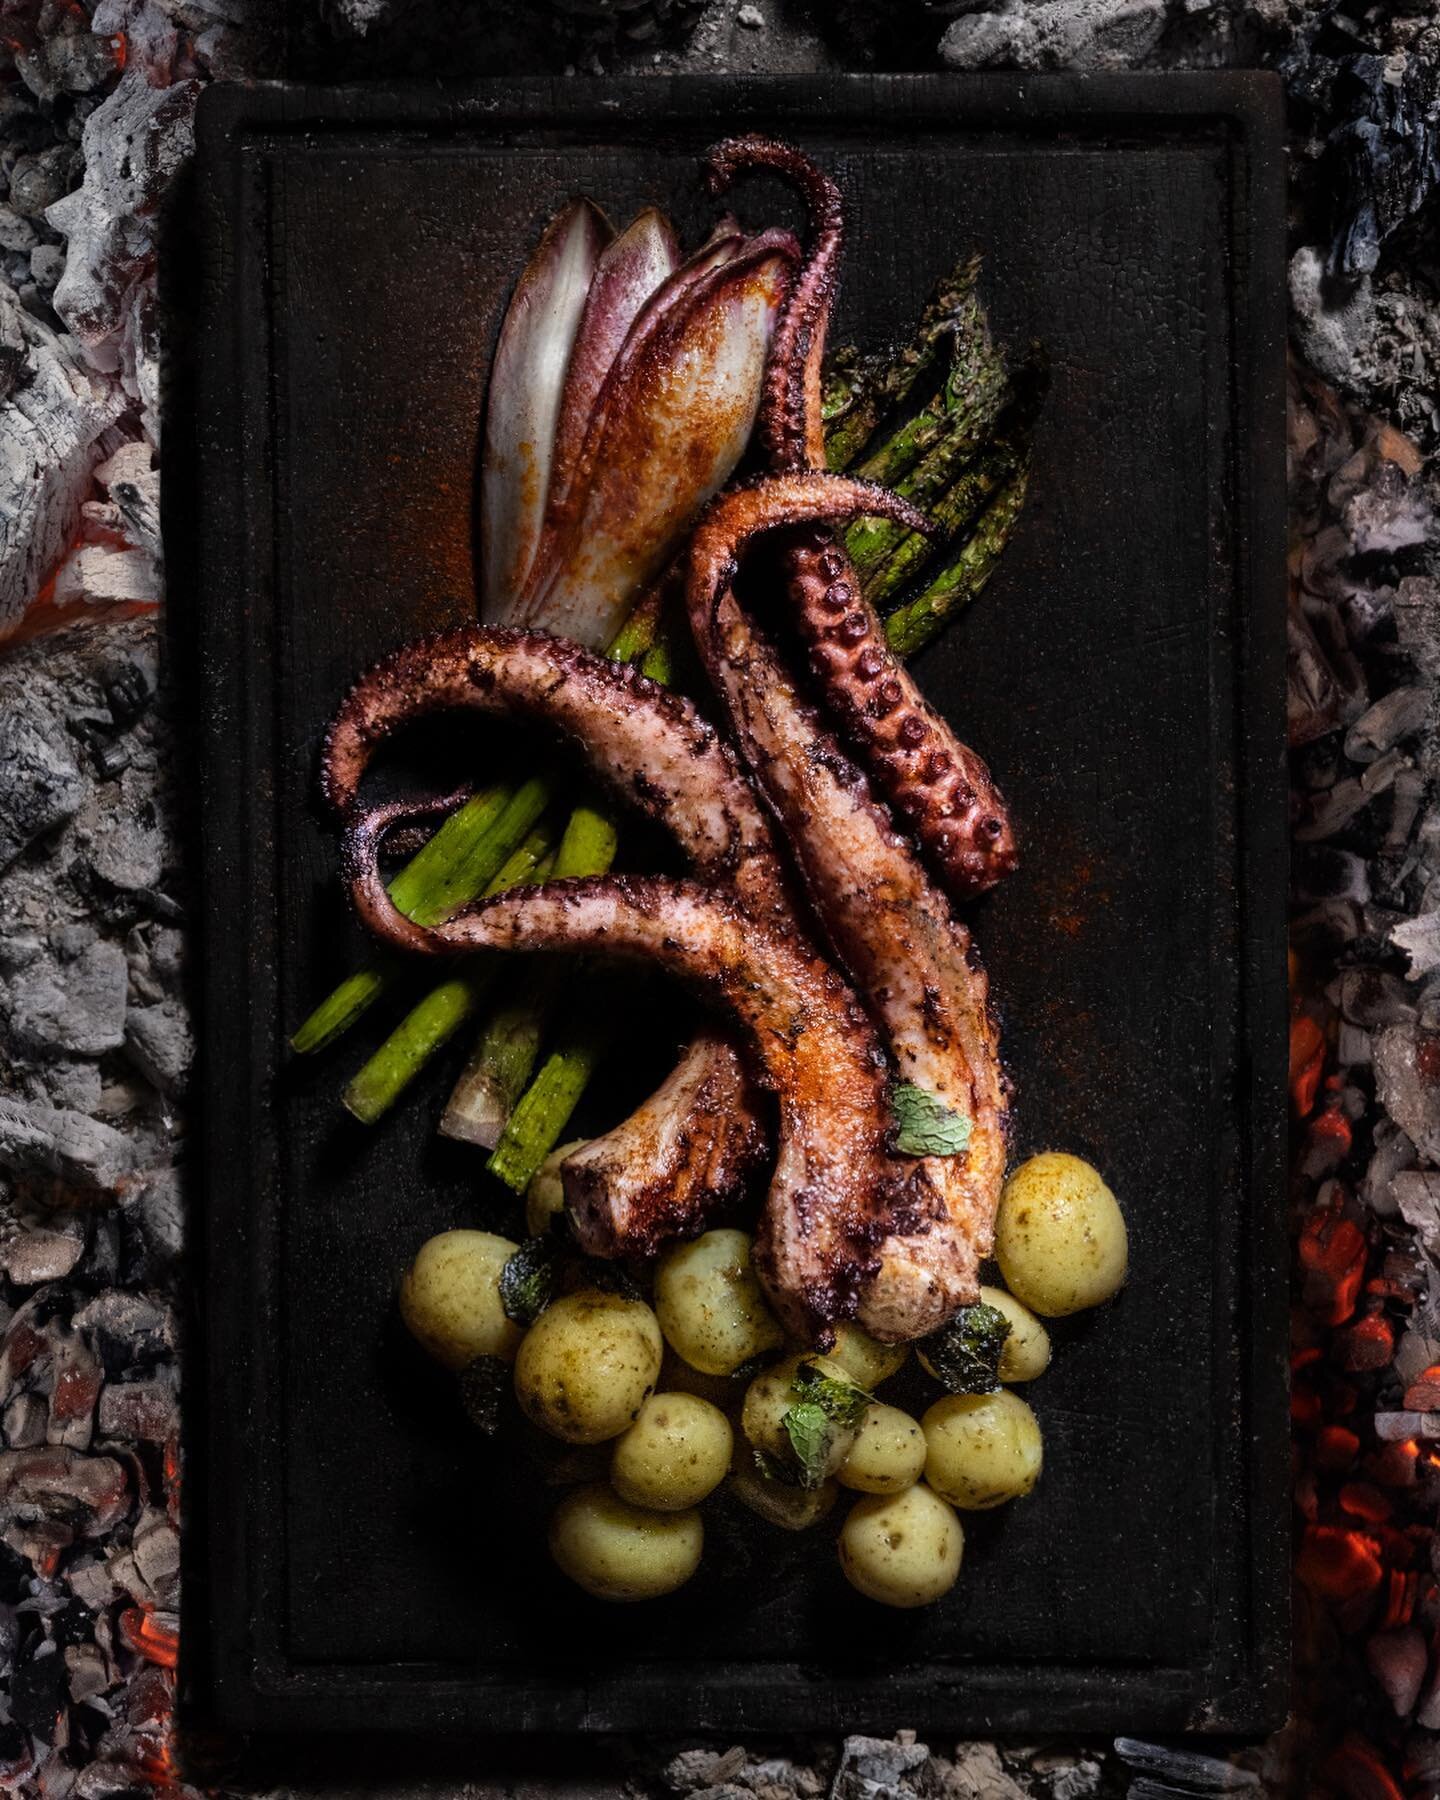 The home food photography studio is going strong and Natalie is now requesting more dishes to shoot - this is great progress!
Last night&rsquo;s treat was polpo, served with Jersey&rsquo;s Royals, asparagus, and chicory.
Octopus should be served deli